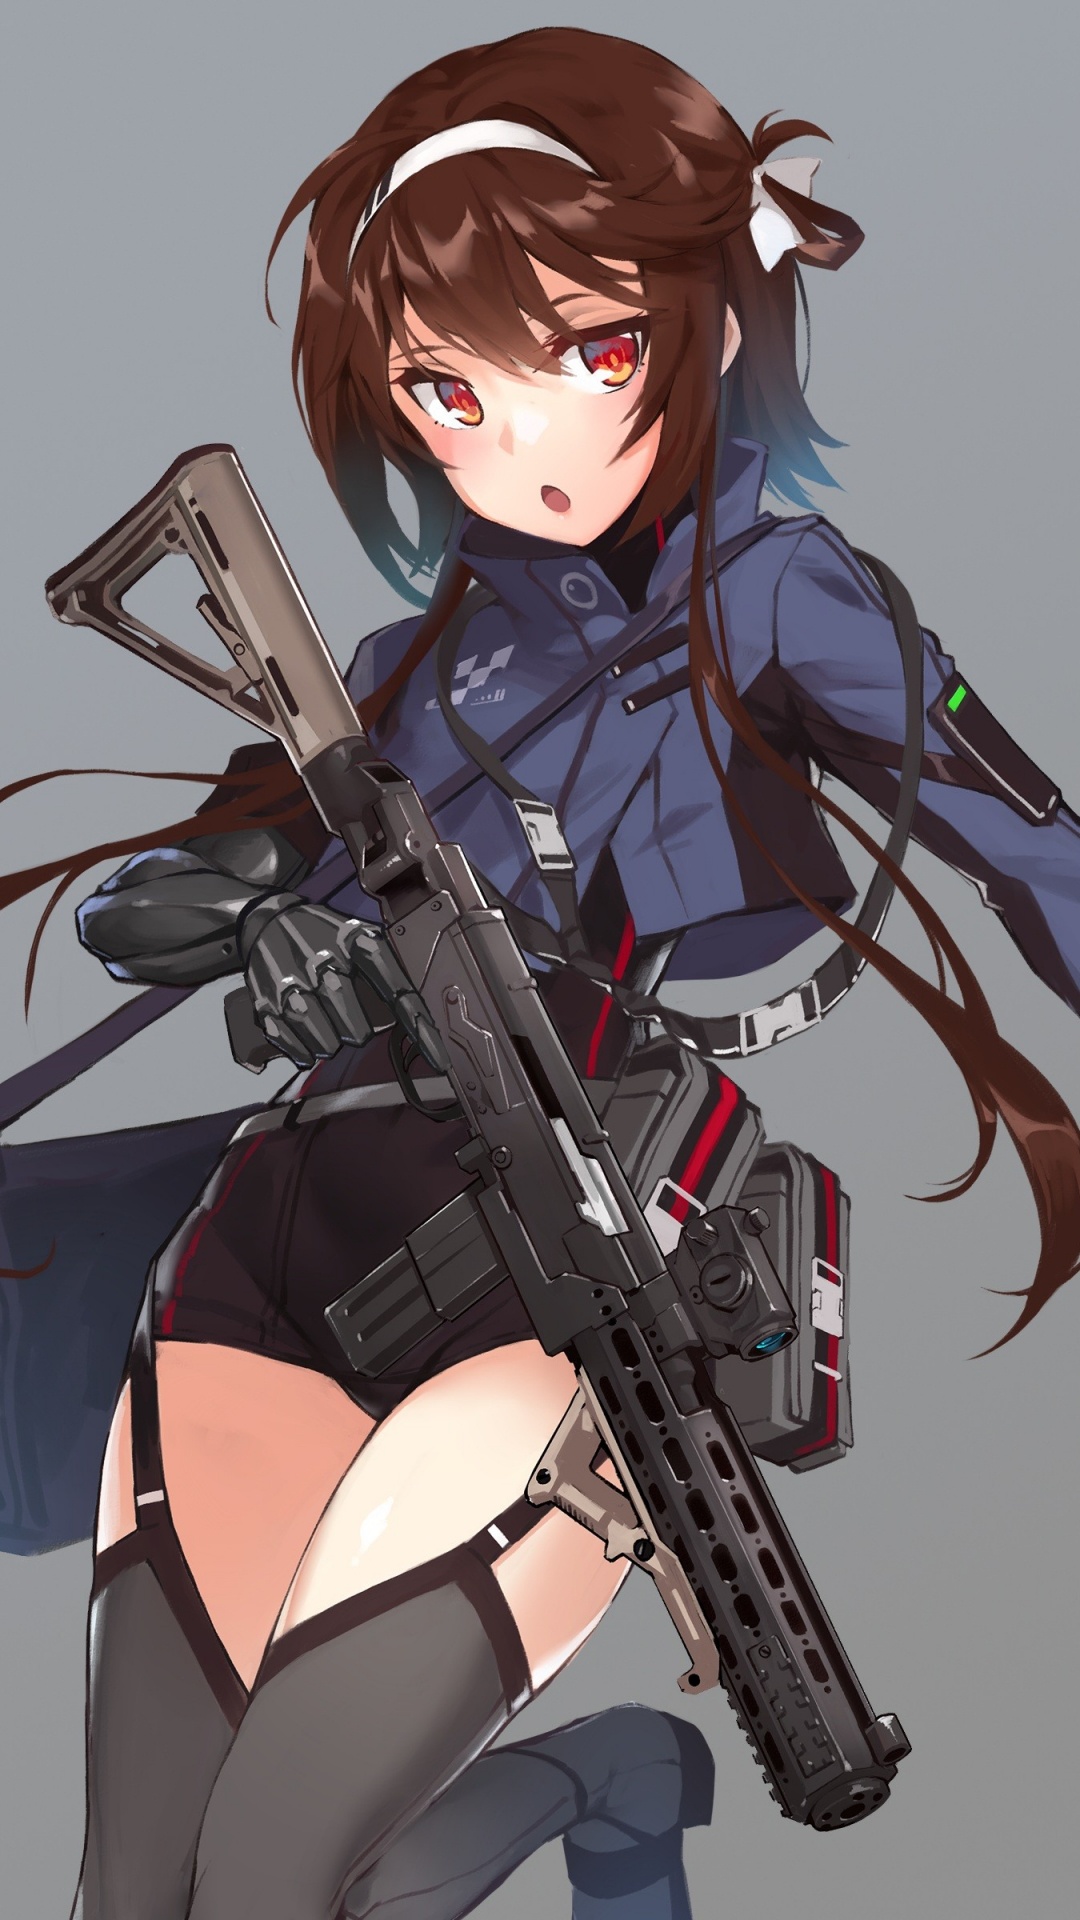 Woman in Blue and Black Dress Holding Rifle Anime Character. Wallpaper in 1080x1920 Resolution